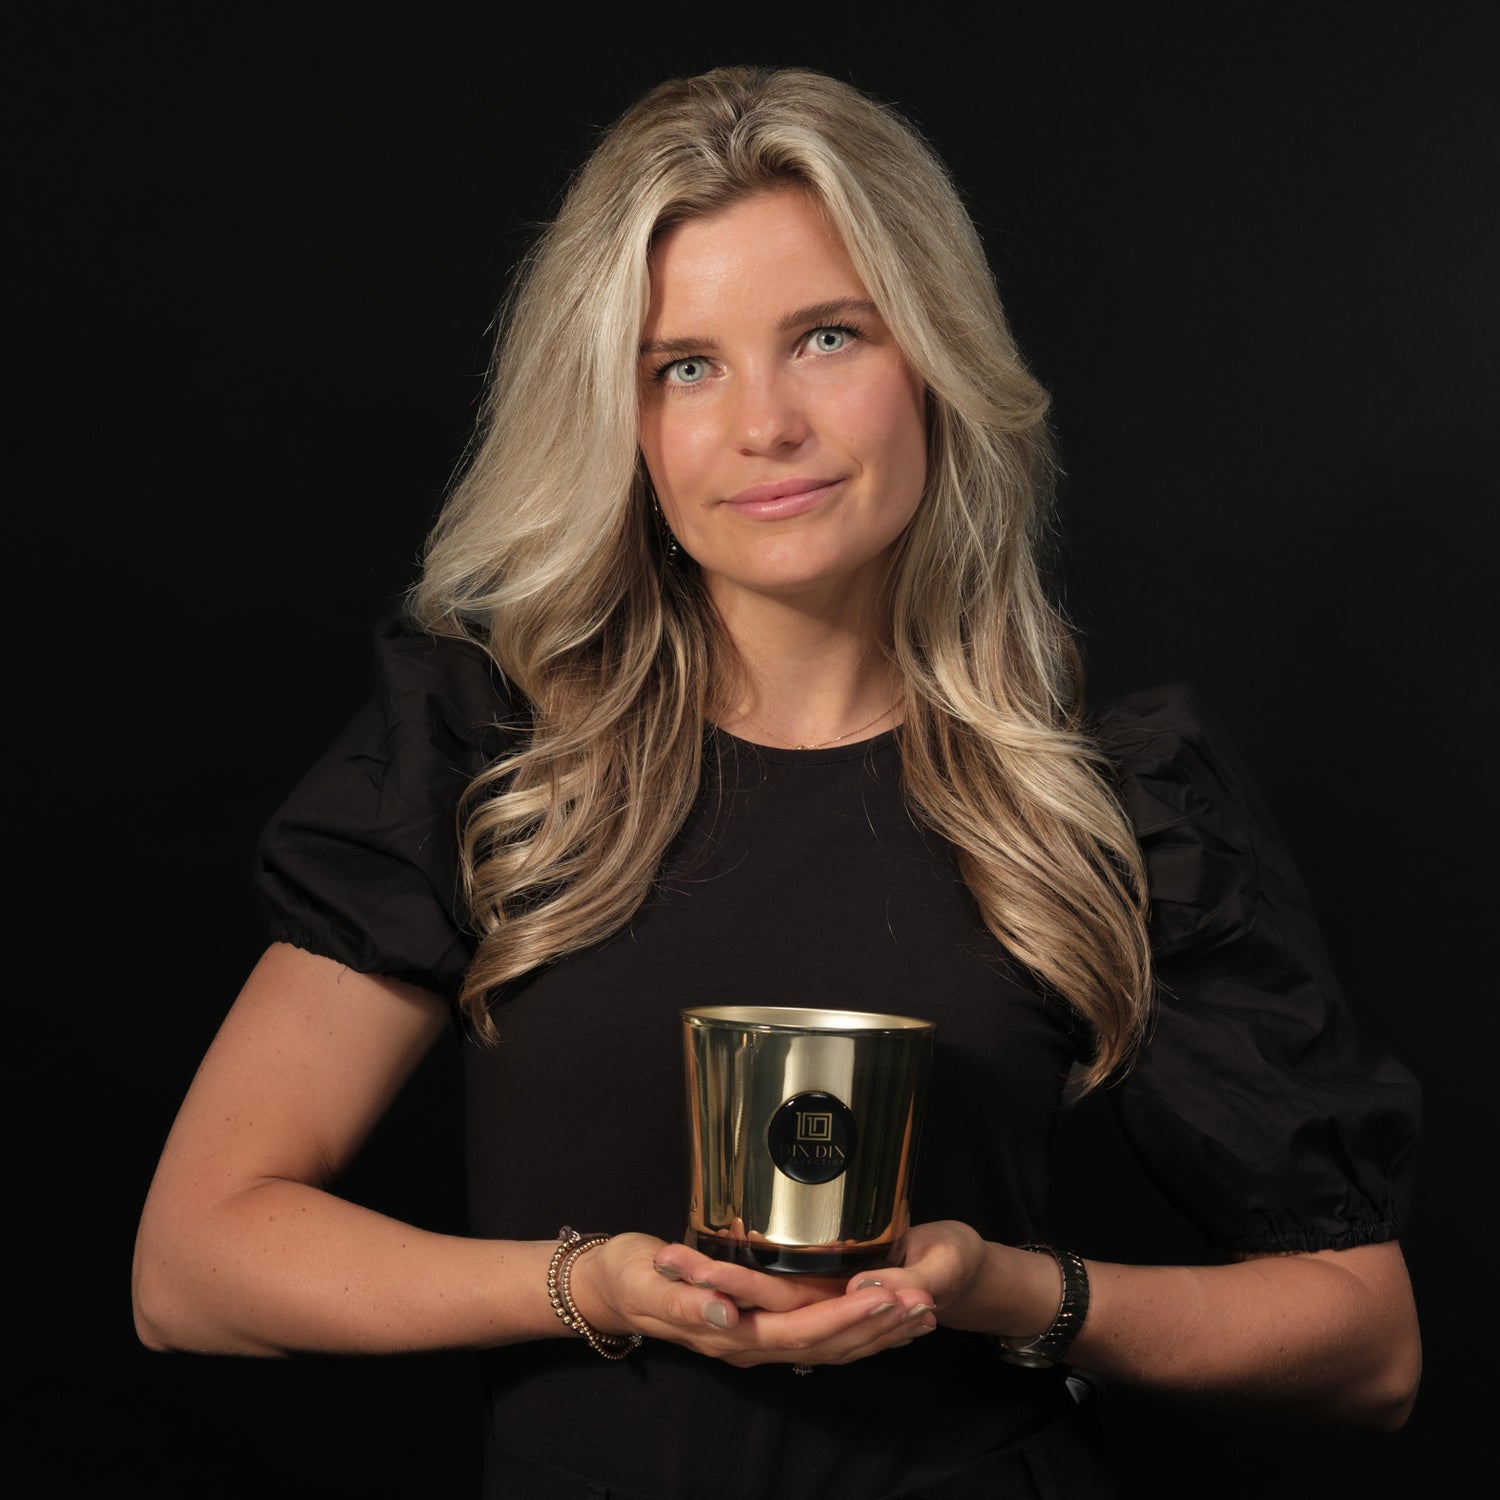 owner and founder of DIX DIX collection Ellemijn Ensink with her first candle DOUX in her hands - DIX DIX collection